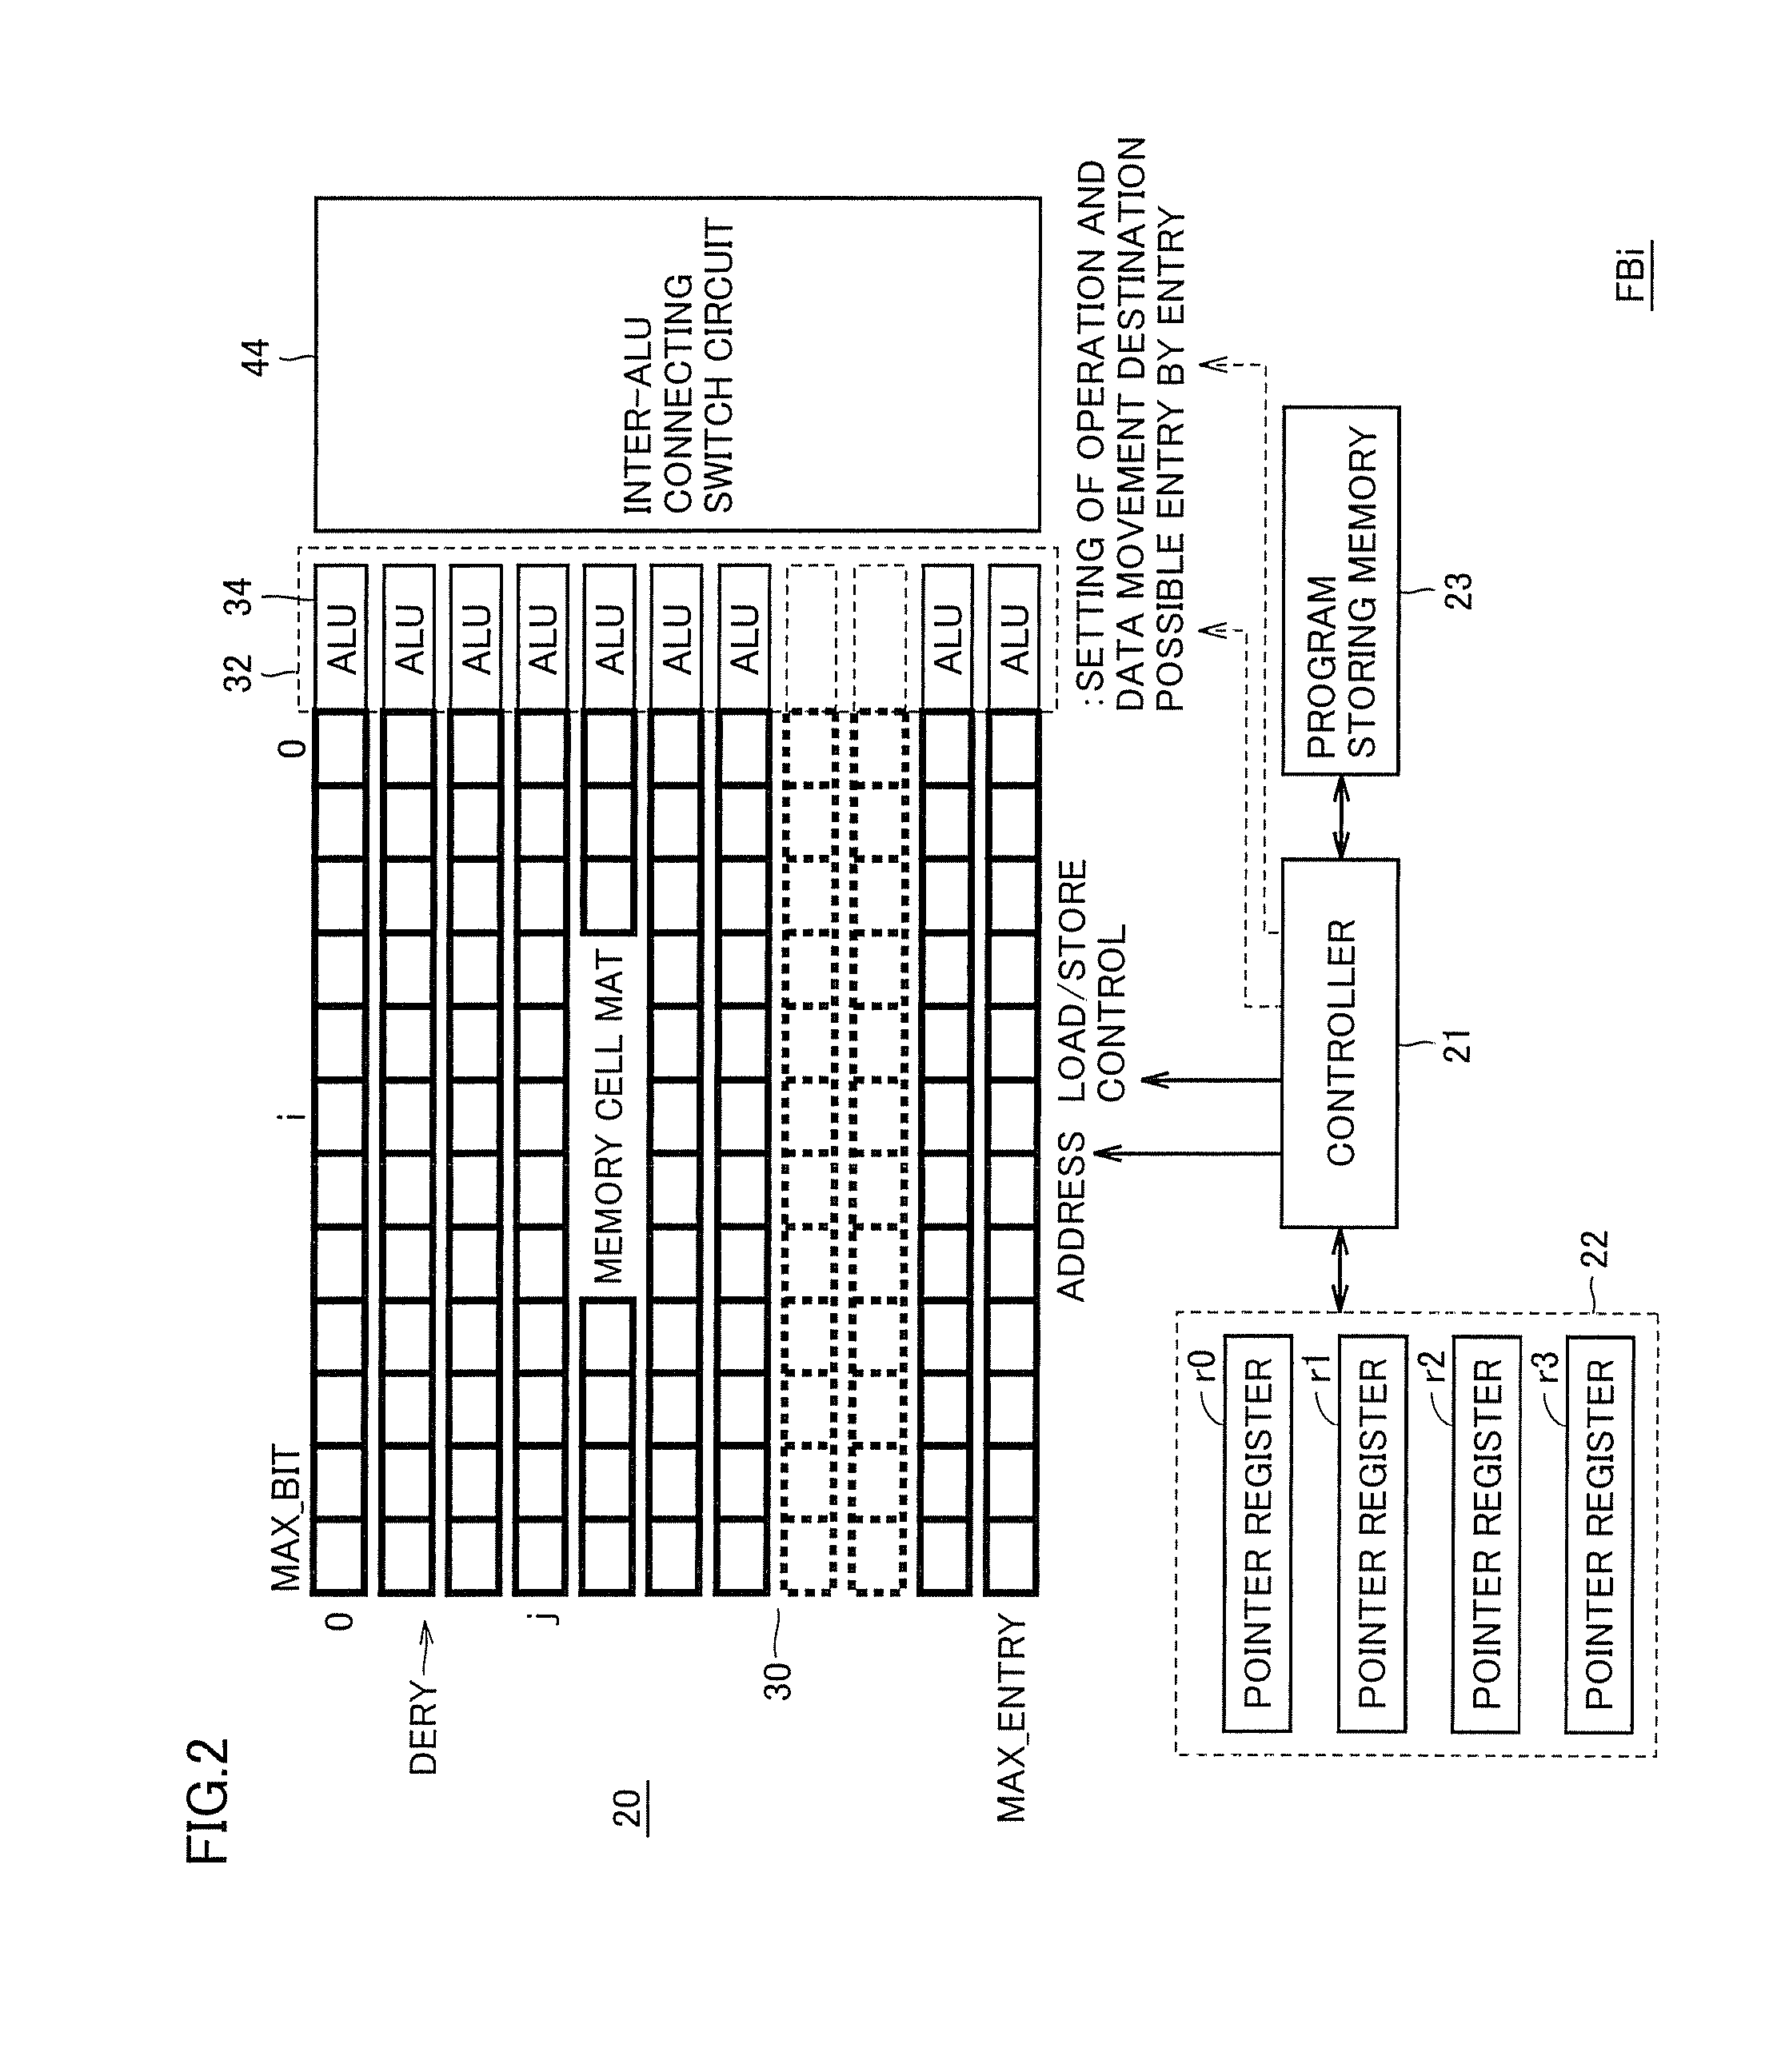 Parallel operation device allowing efficient parallel operational processing